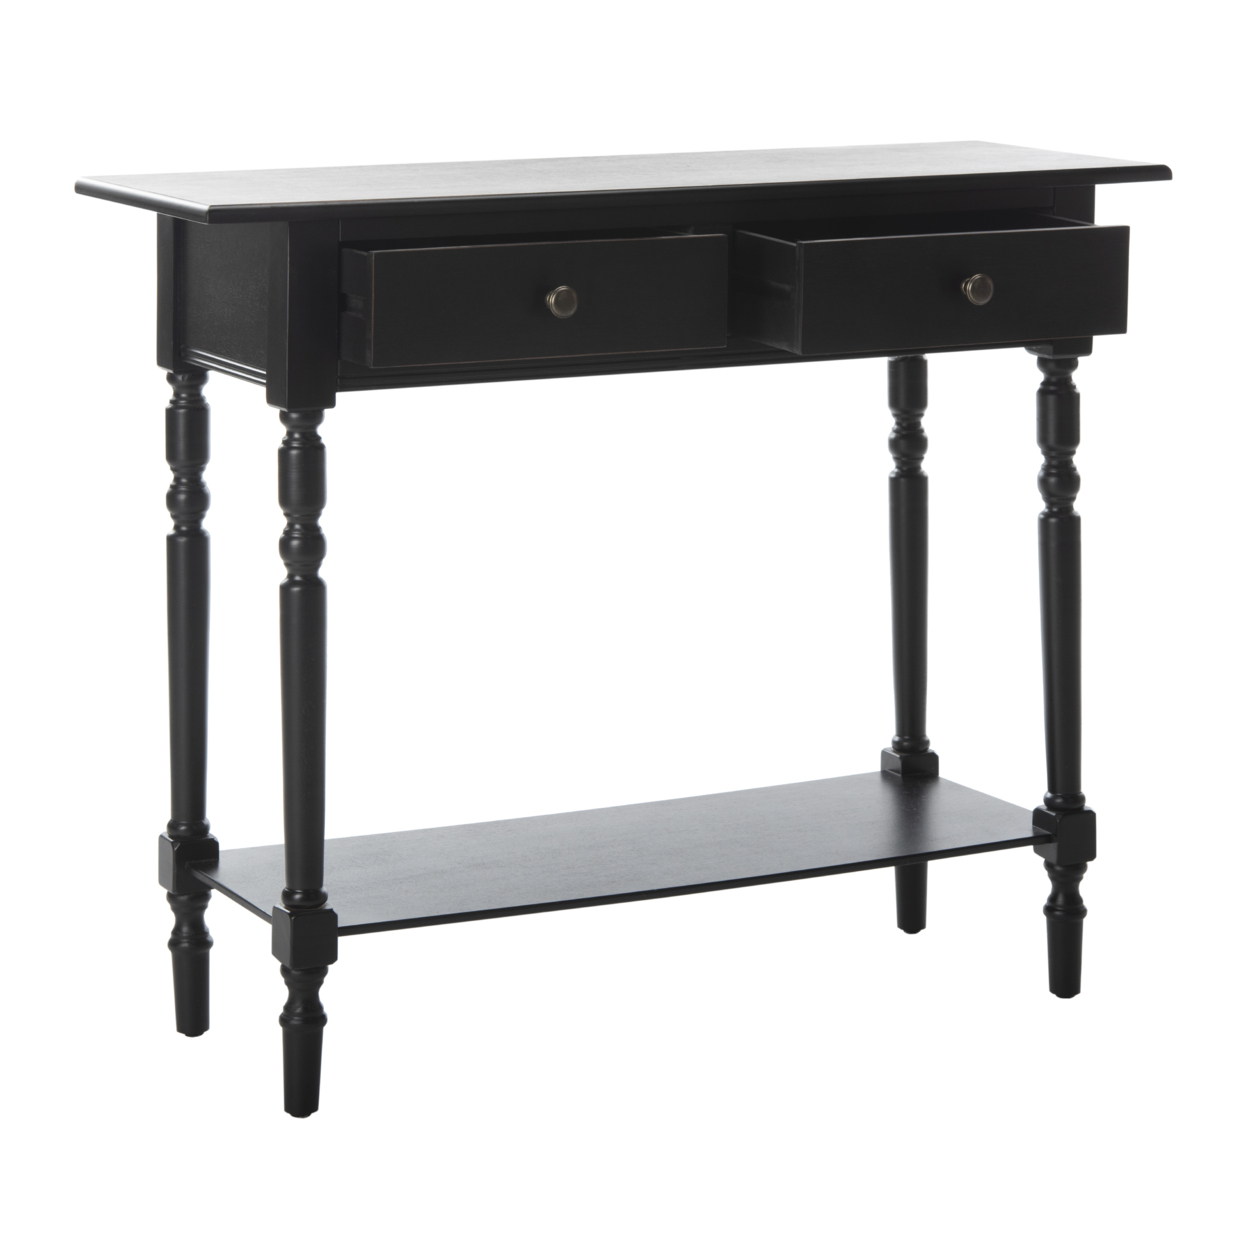 SAFAVIEH Rosemary 2-Drawer Console Table Distressed Black